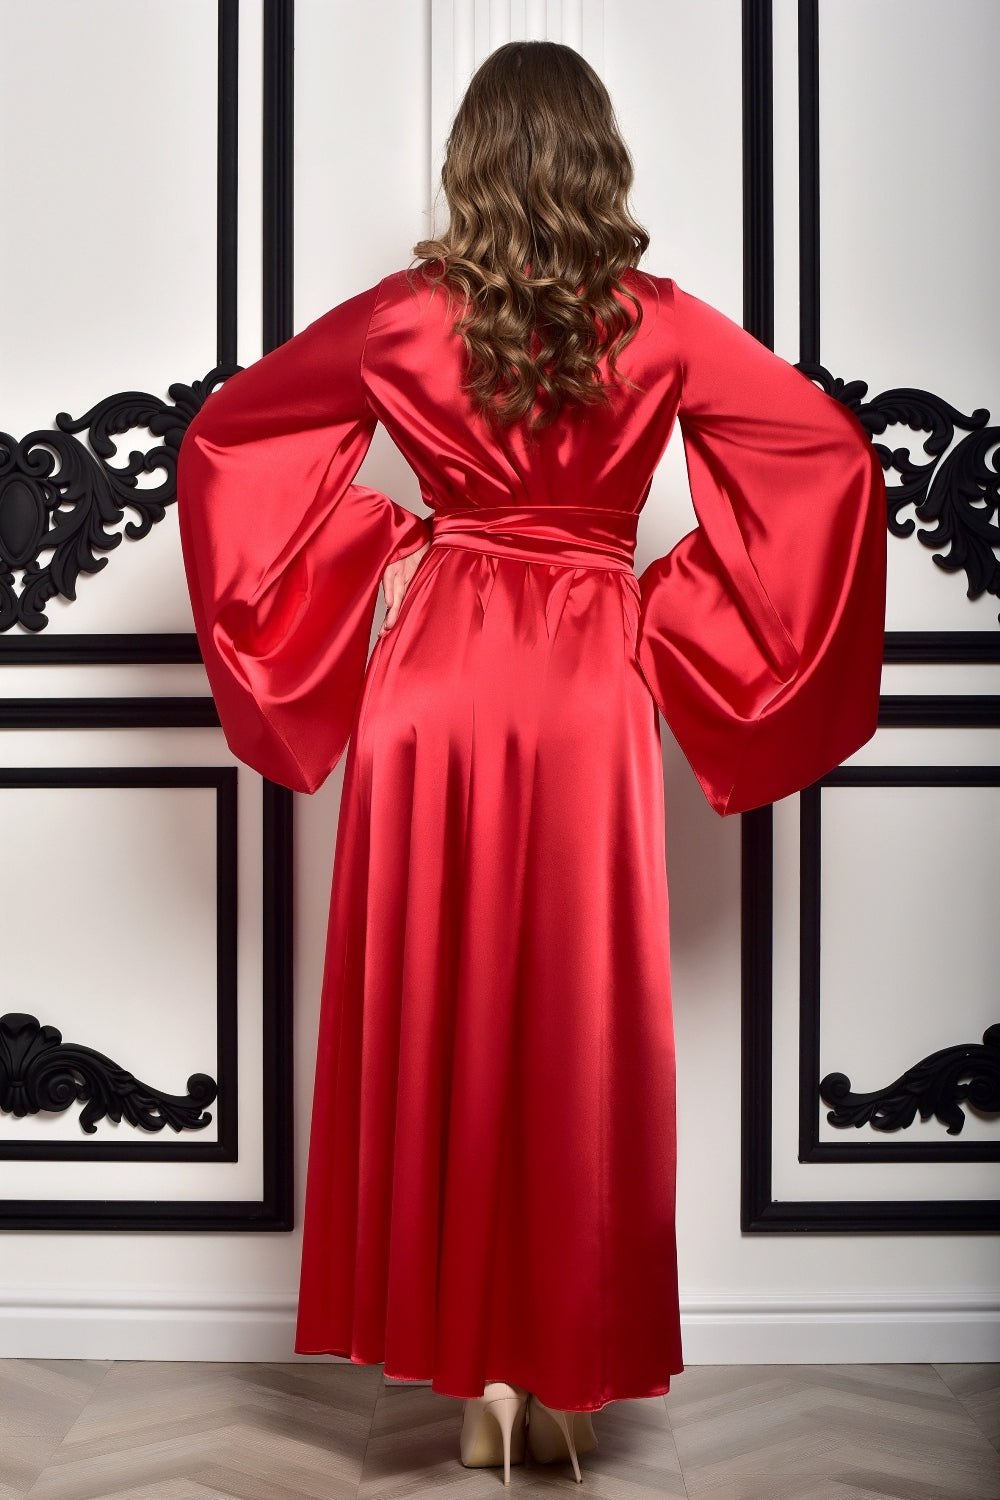 Chic and stylish red satin kimono dressing gown, ideal for bridal party pampering